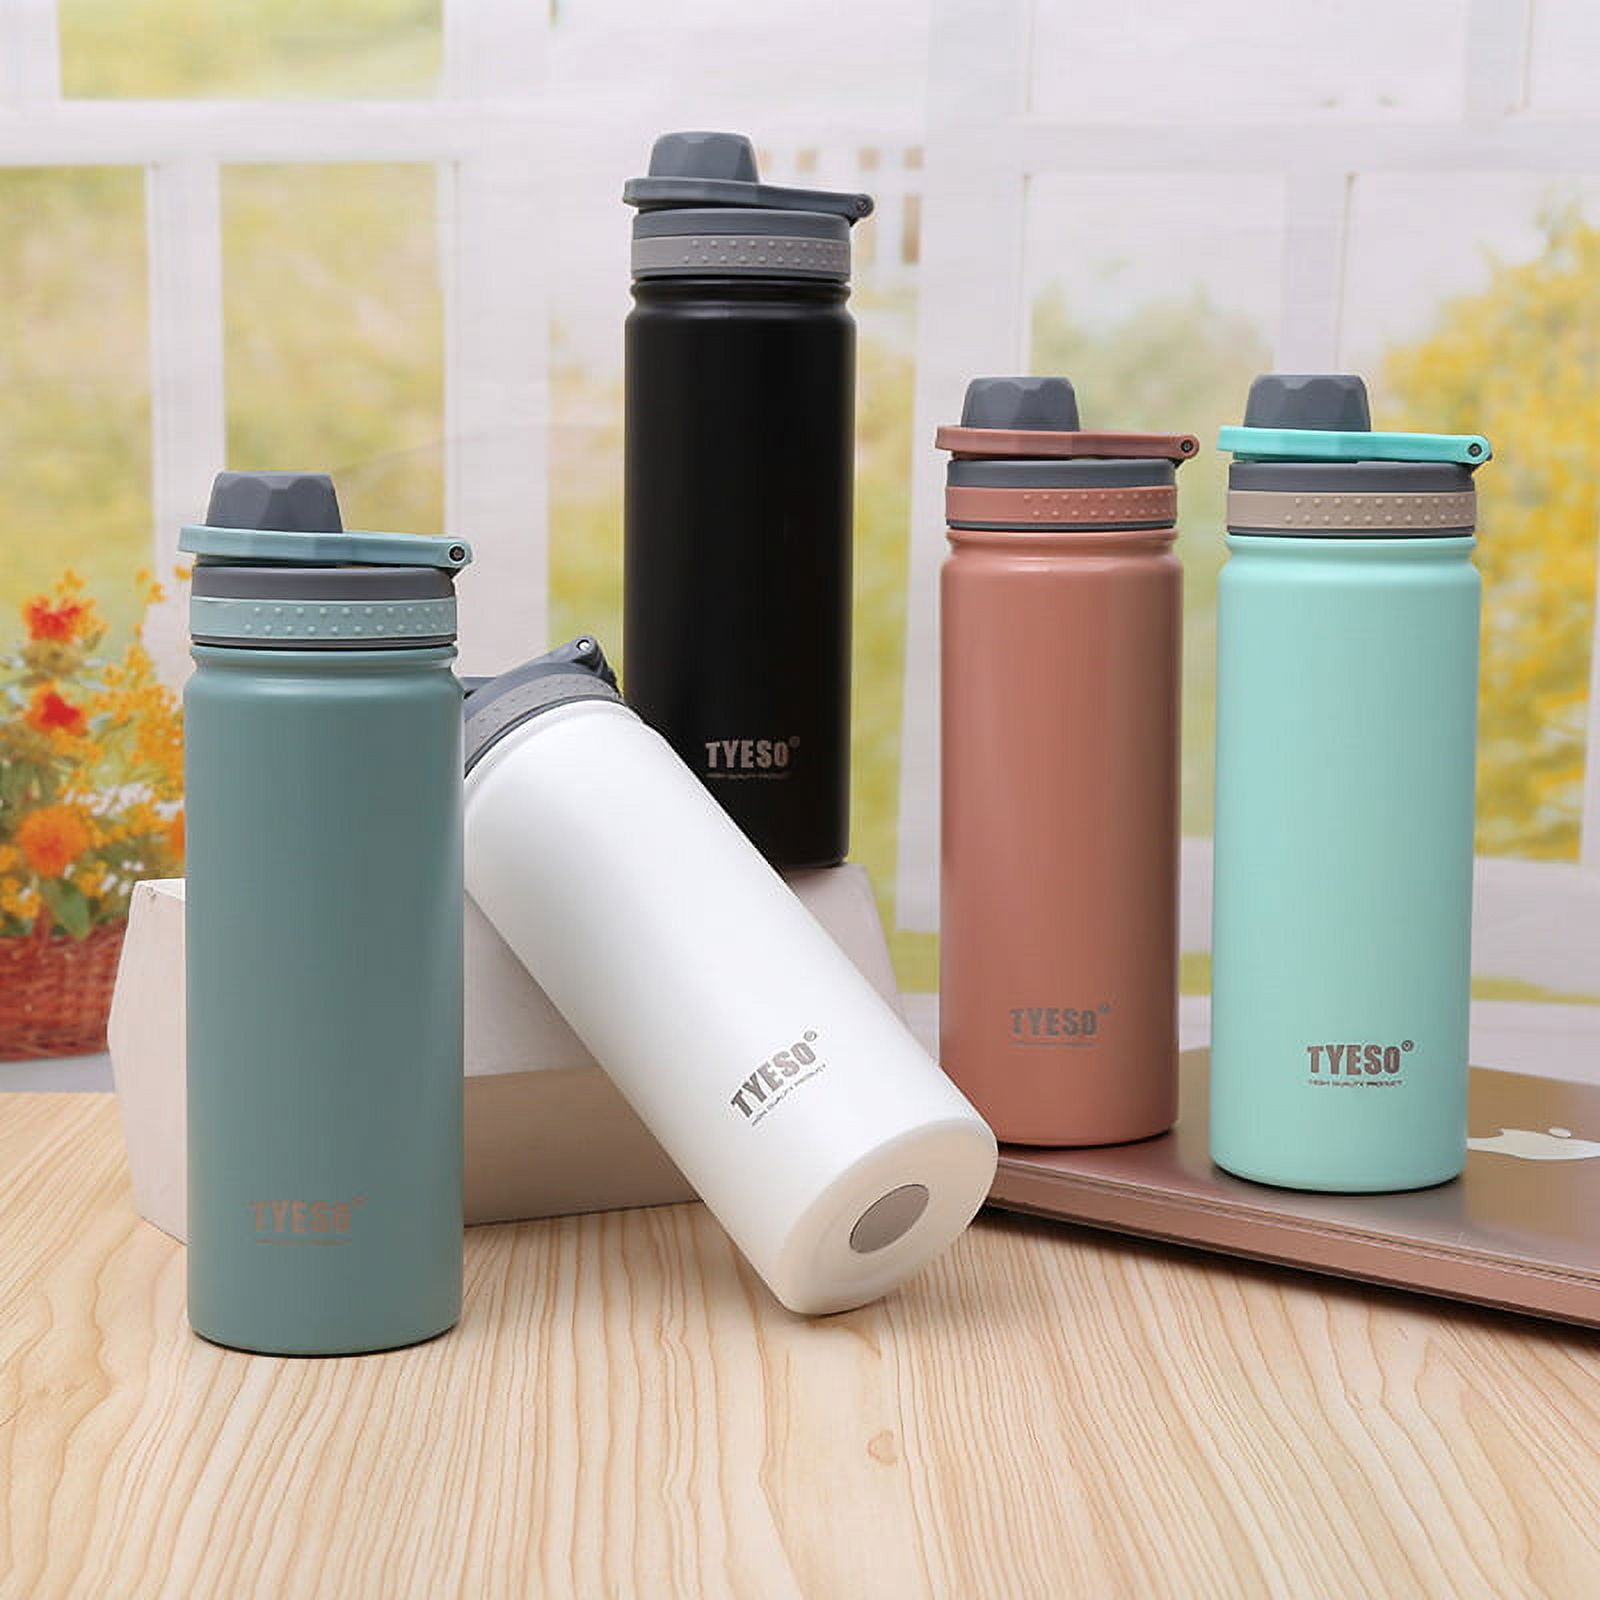 Homgreen Vacuum Insulated Thermos Water Bottle with Wide Mouth Cup BPA-Free  18/8 Stainless Steel Water Bottles for Cold & Hot Drink Coffee 